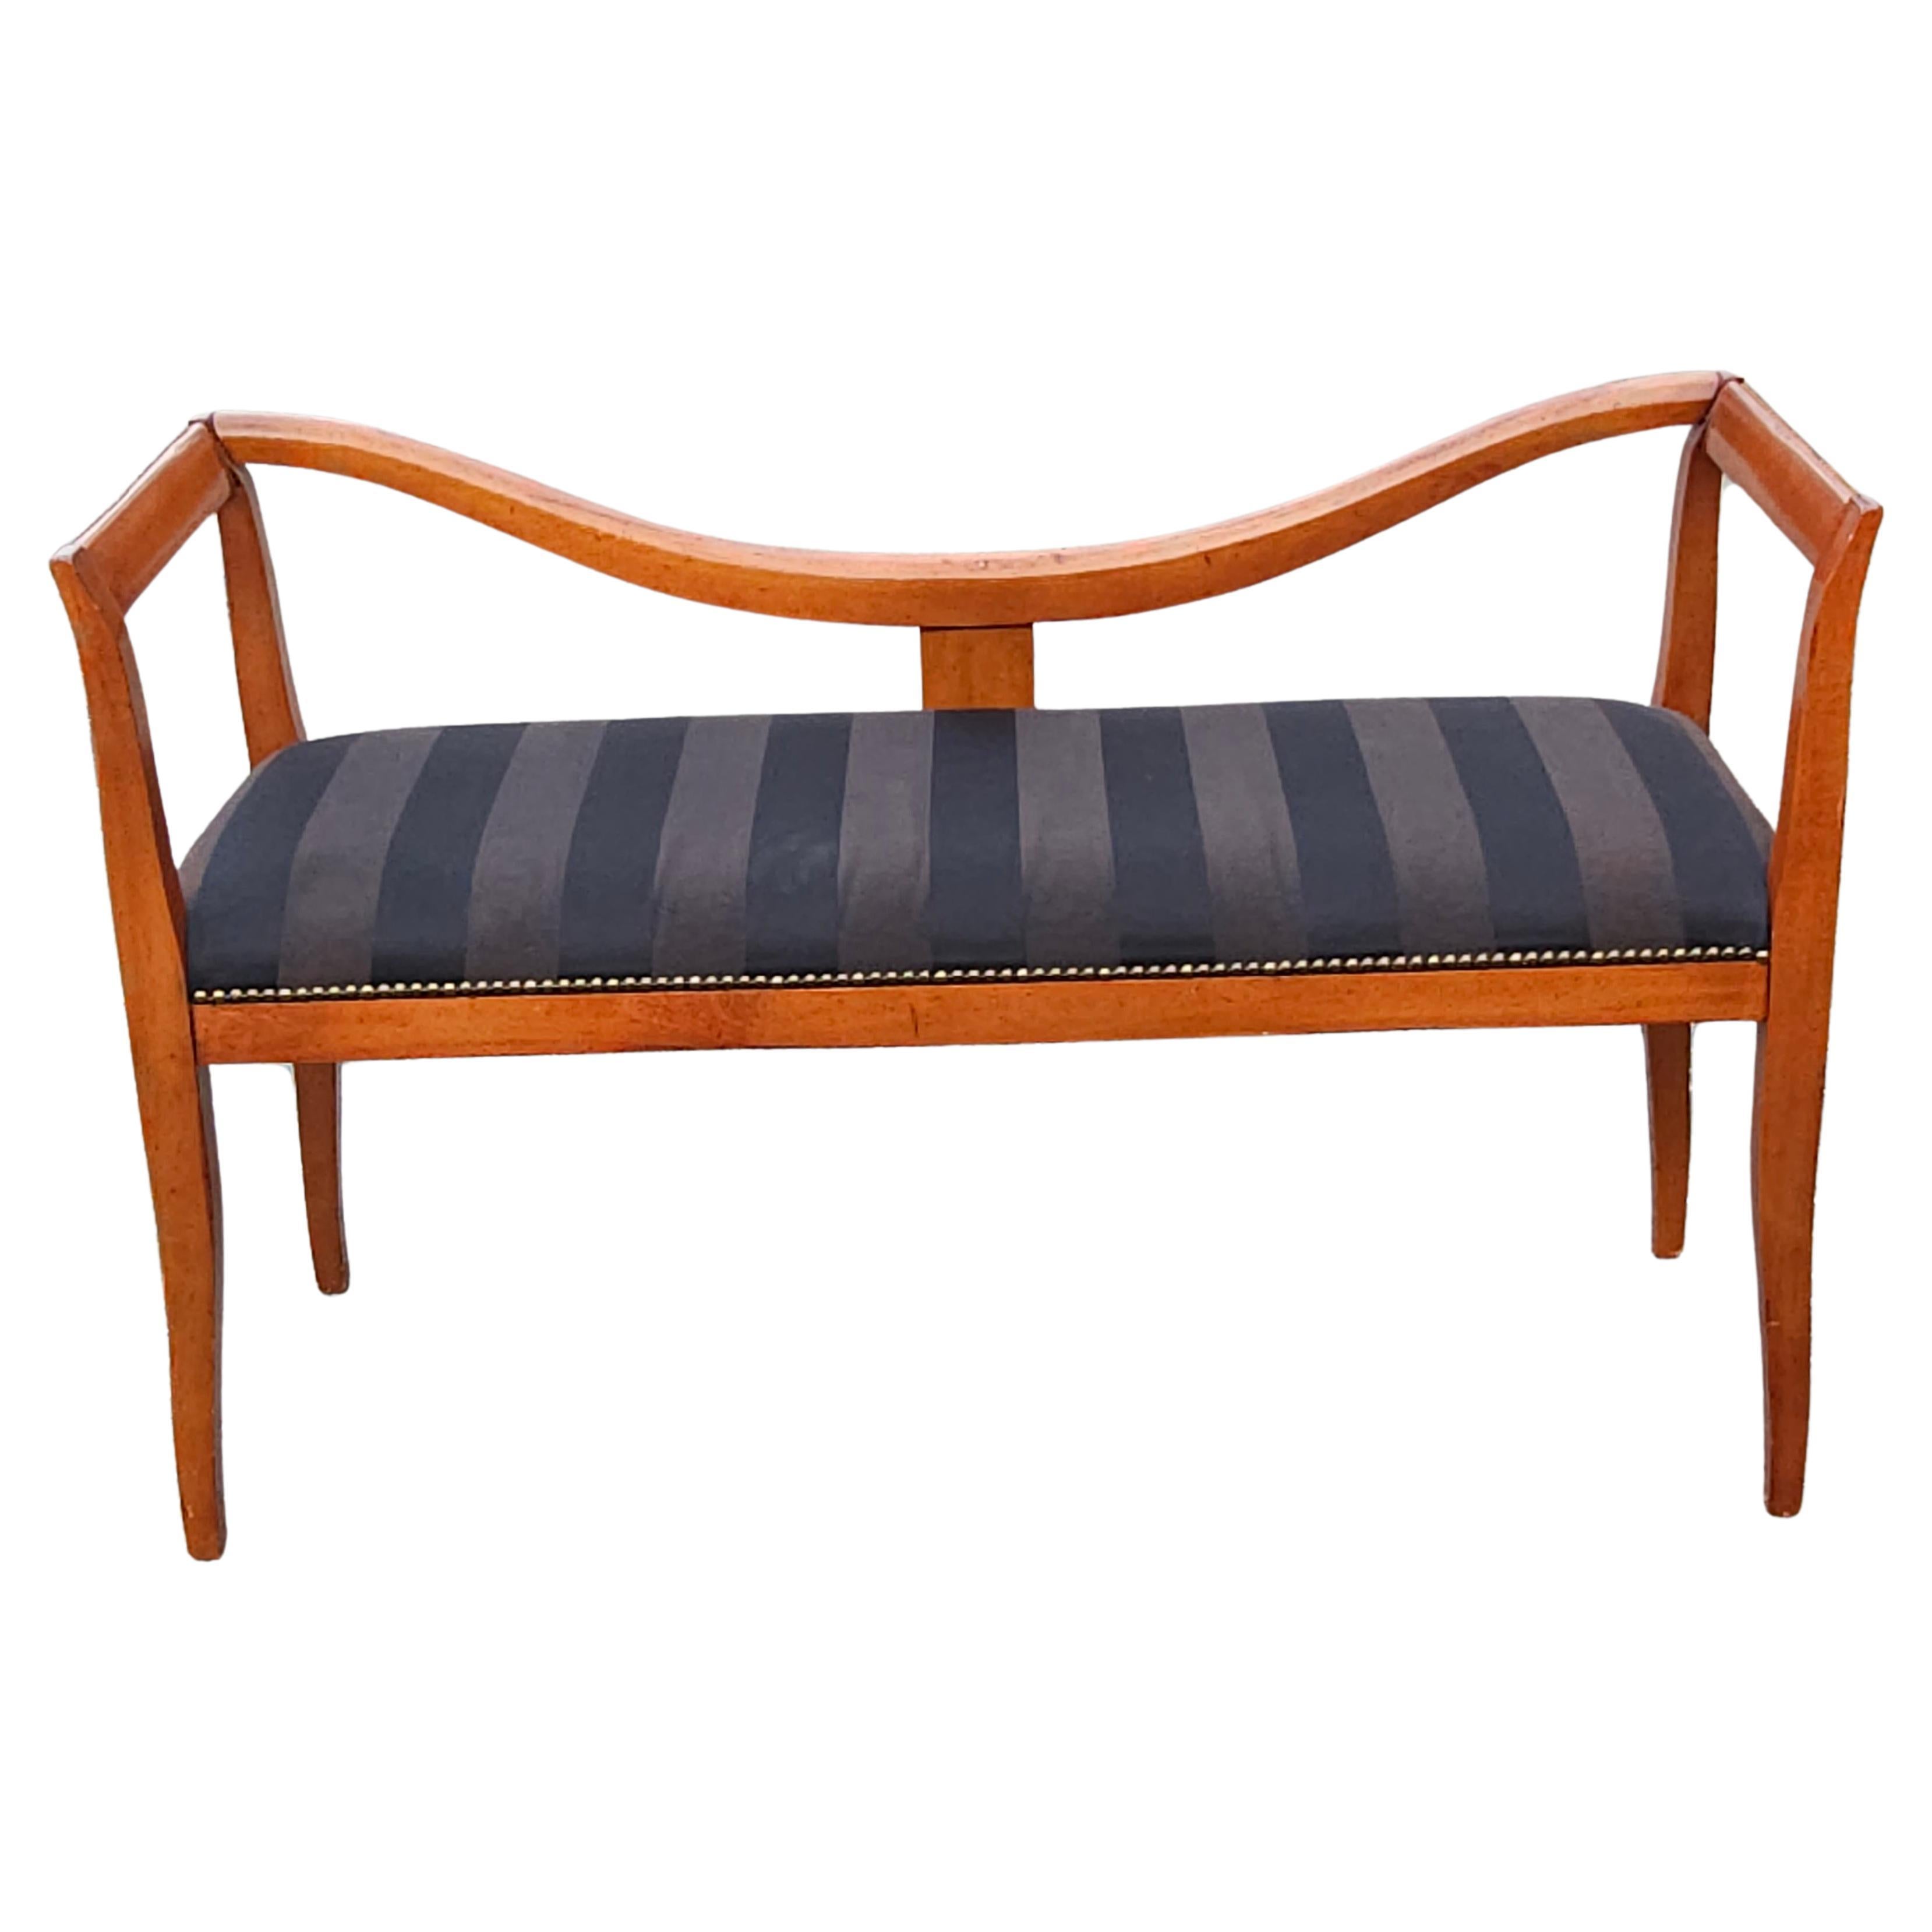 Late 20th C. Italian Lacquered Solid Cherry and Upholstered Bench Settee For Sale